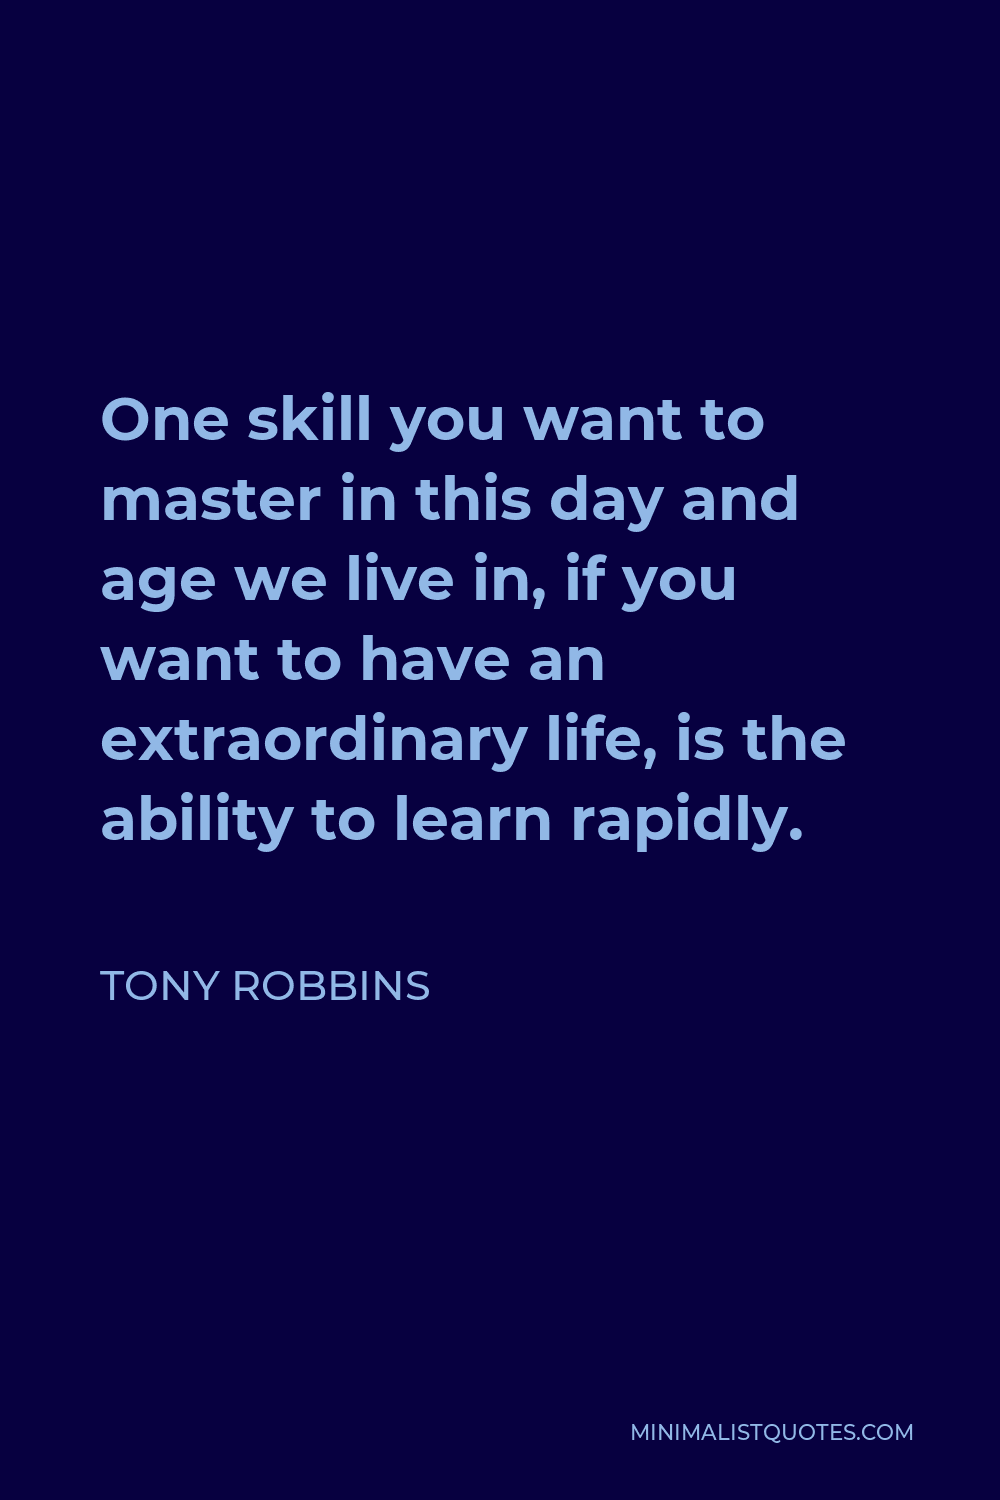 Tony Robbins Quote - One skill you want to master in this day and age we live in, if you want to have an extraordinary life, is the ability to learn rapidly.